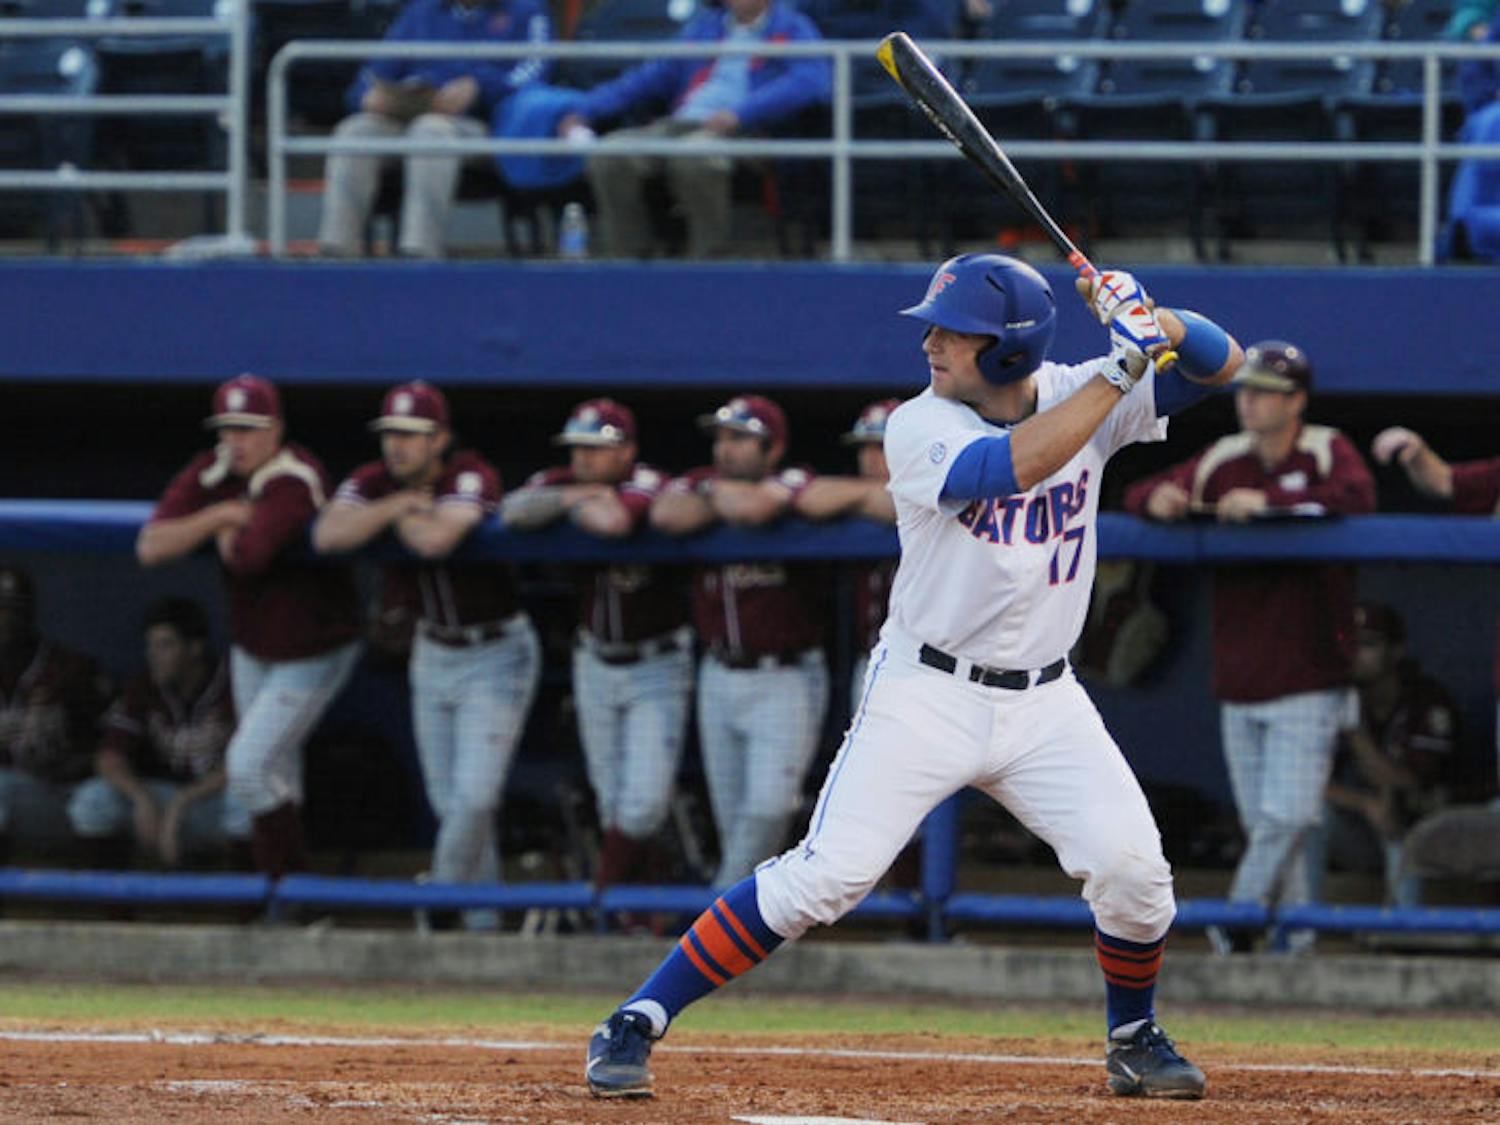 Taylor Gushue bats during Florida’s 3-1 win against FSU on March 18 at McKethan Stadium. Gushue was a second-team All-American in 2014 after batting a career-high .318